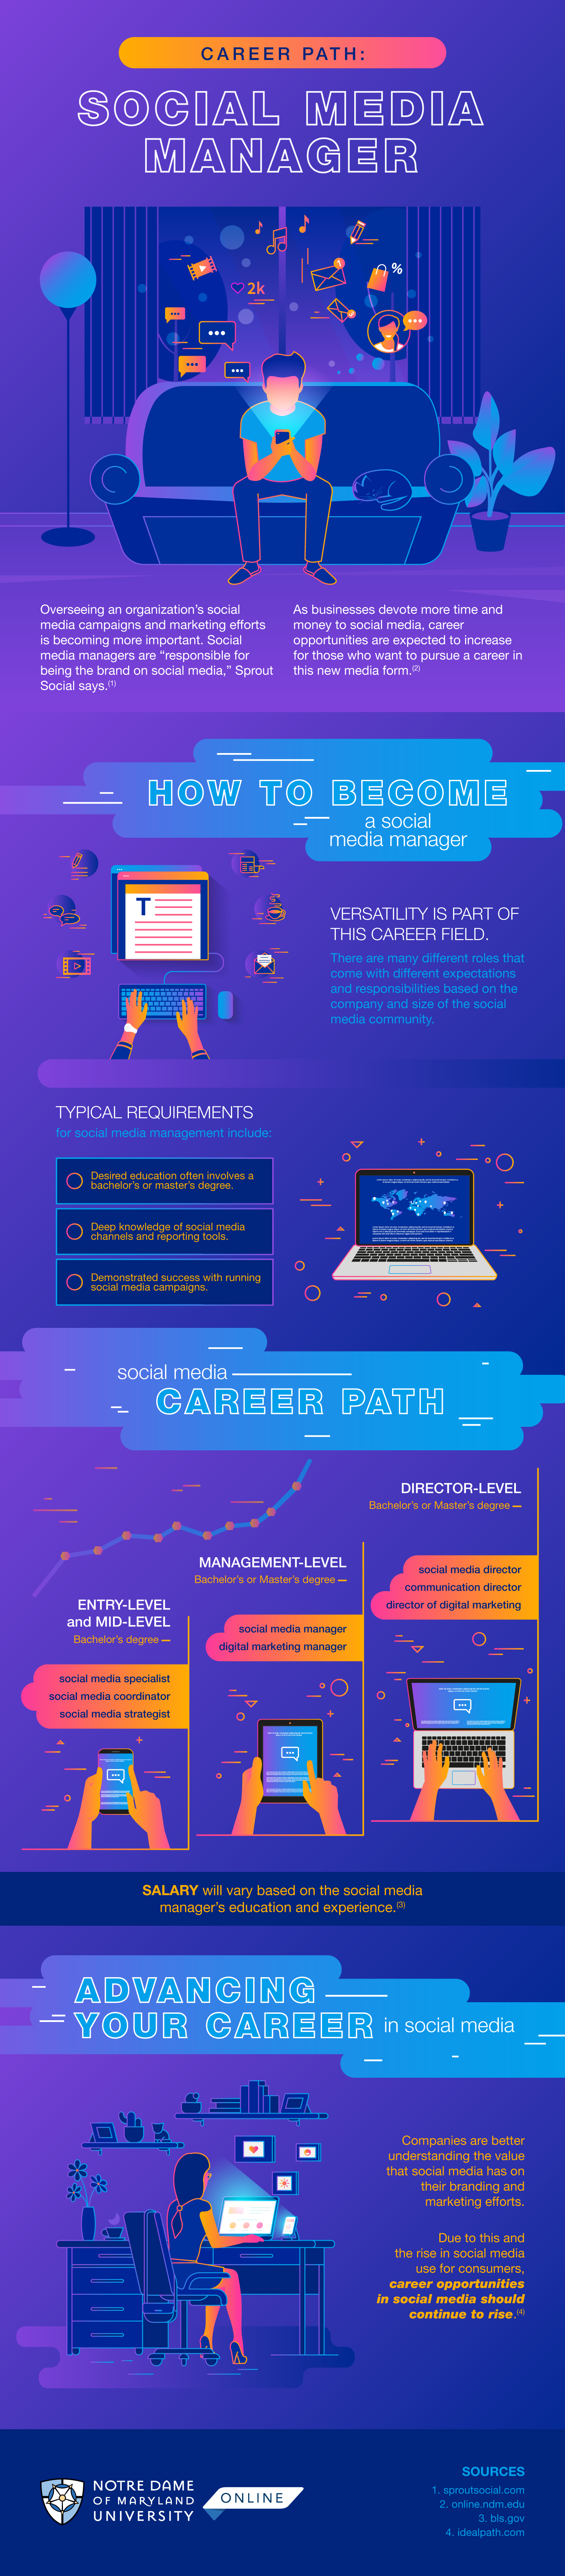 Social Media Manager Infographic